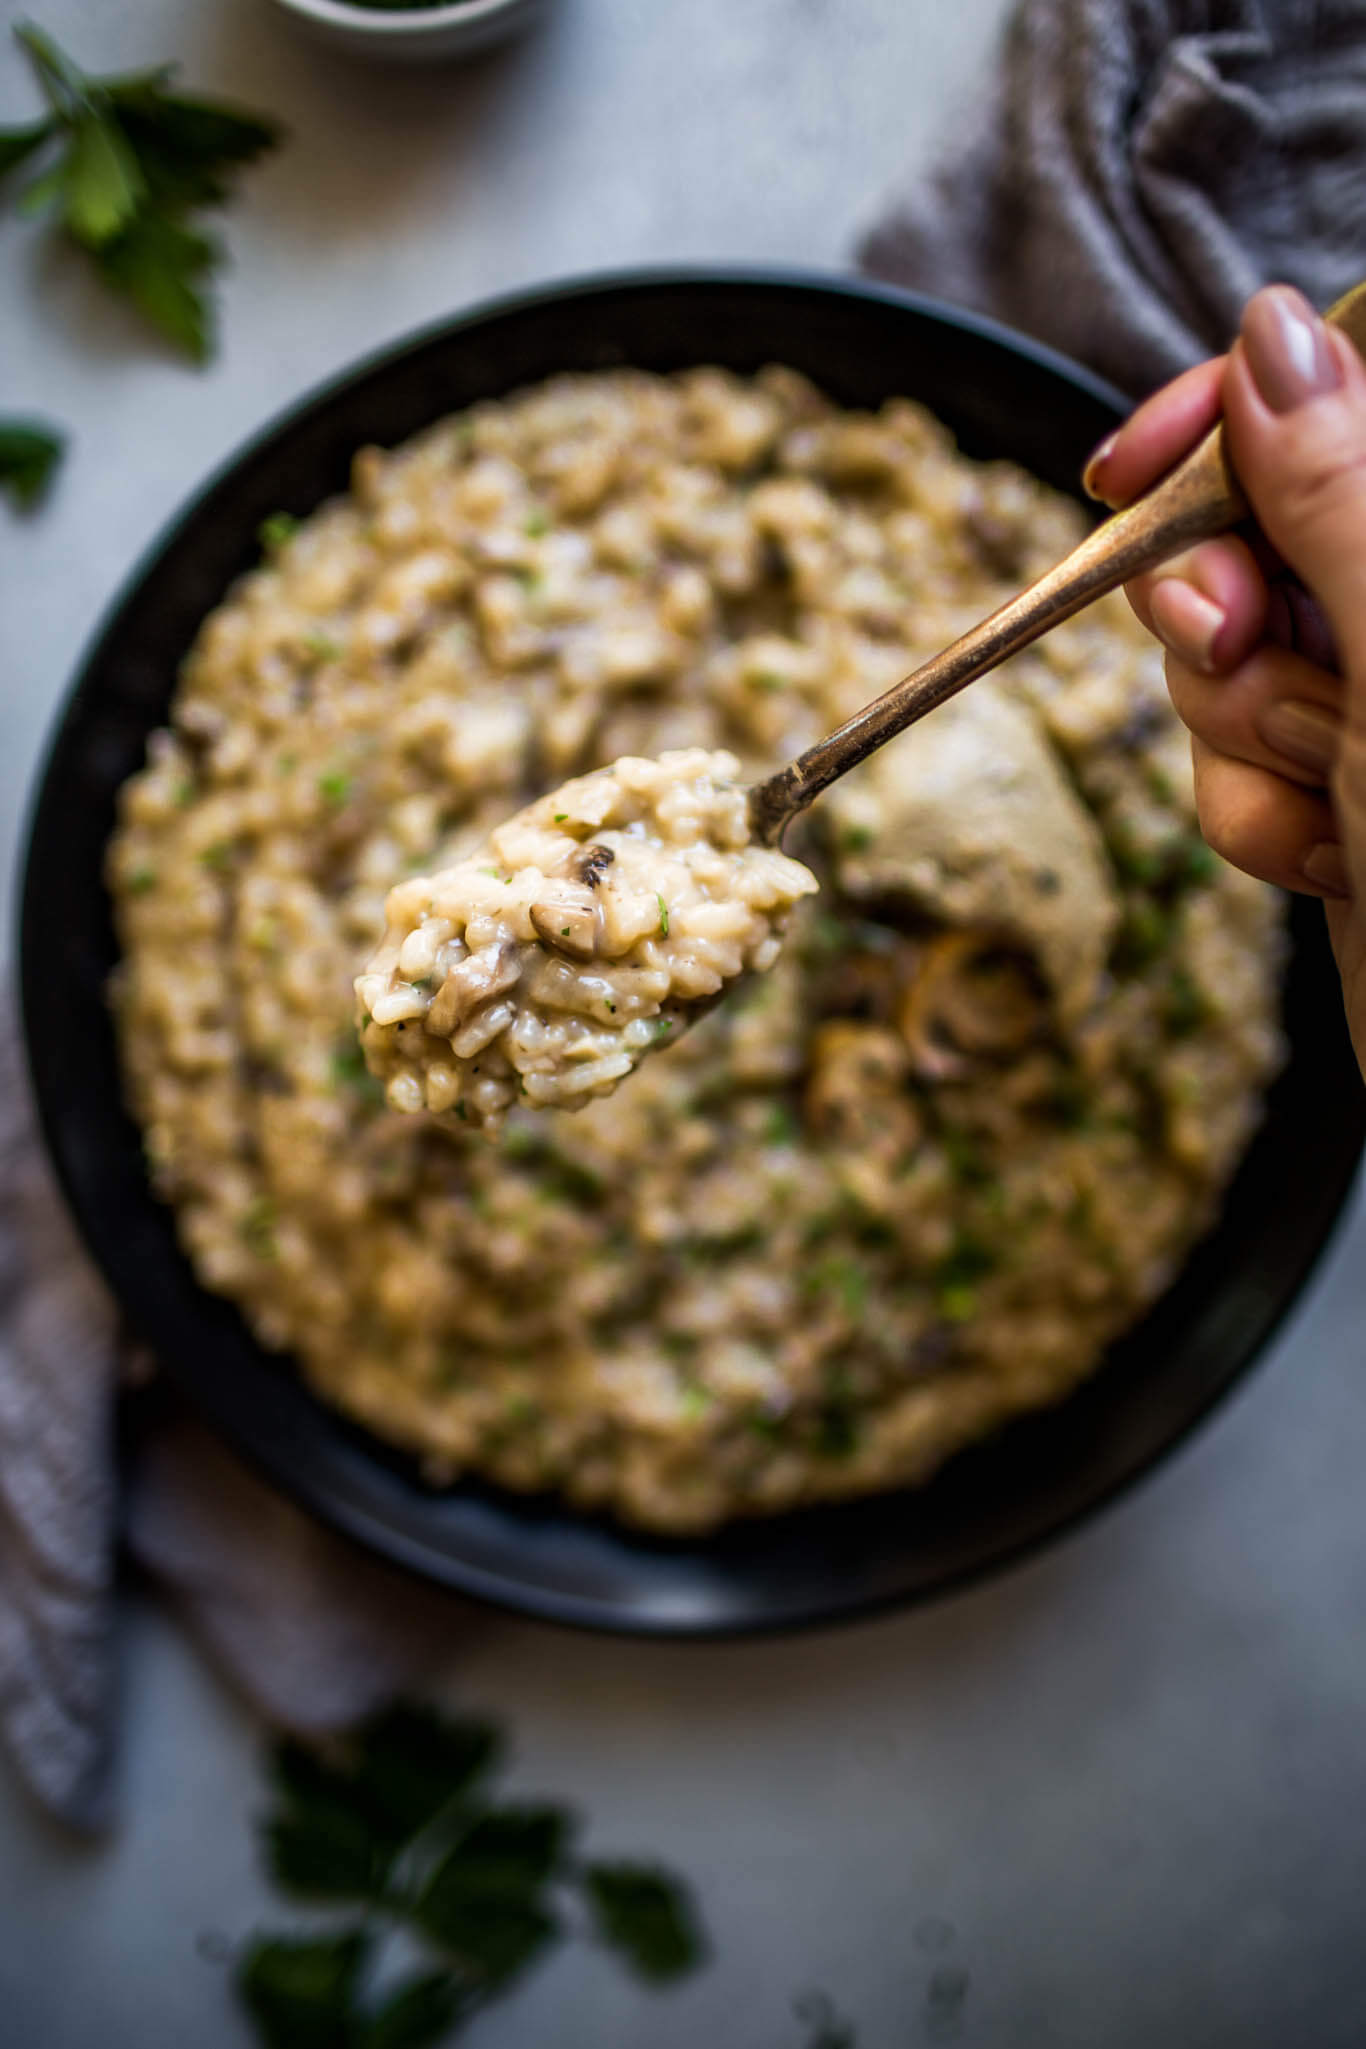 Spoonful of mushroom risotto.